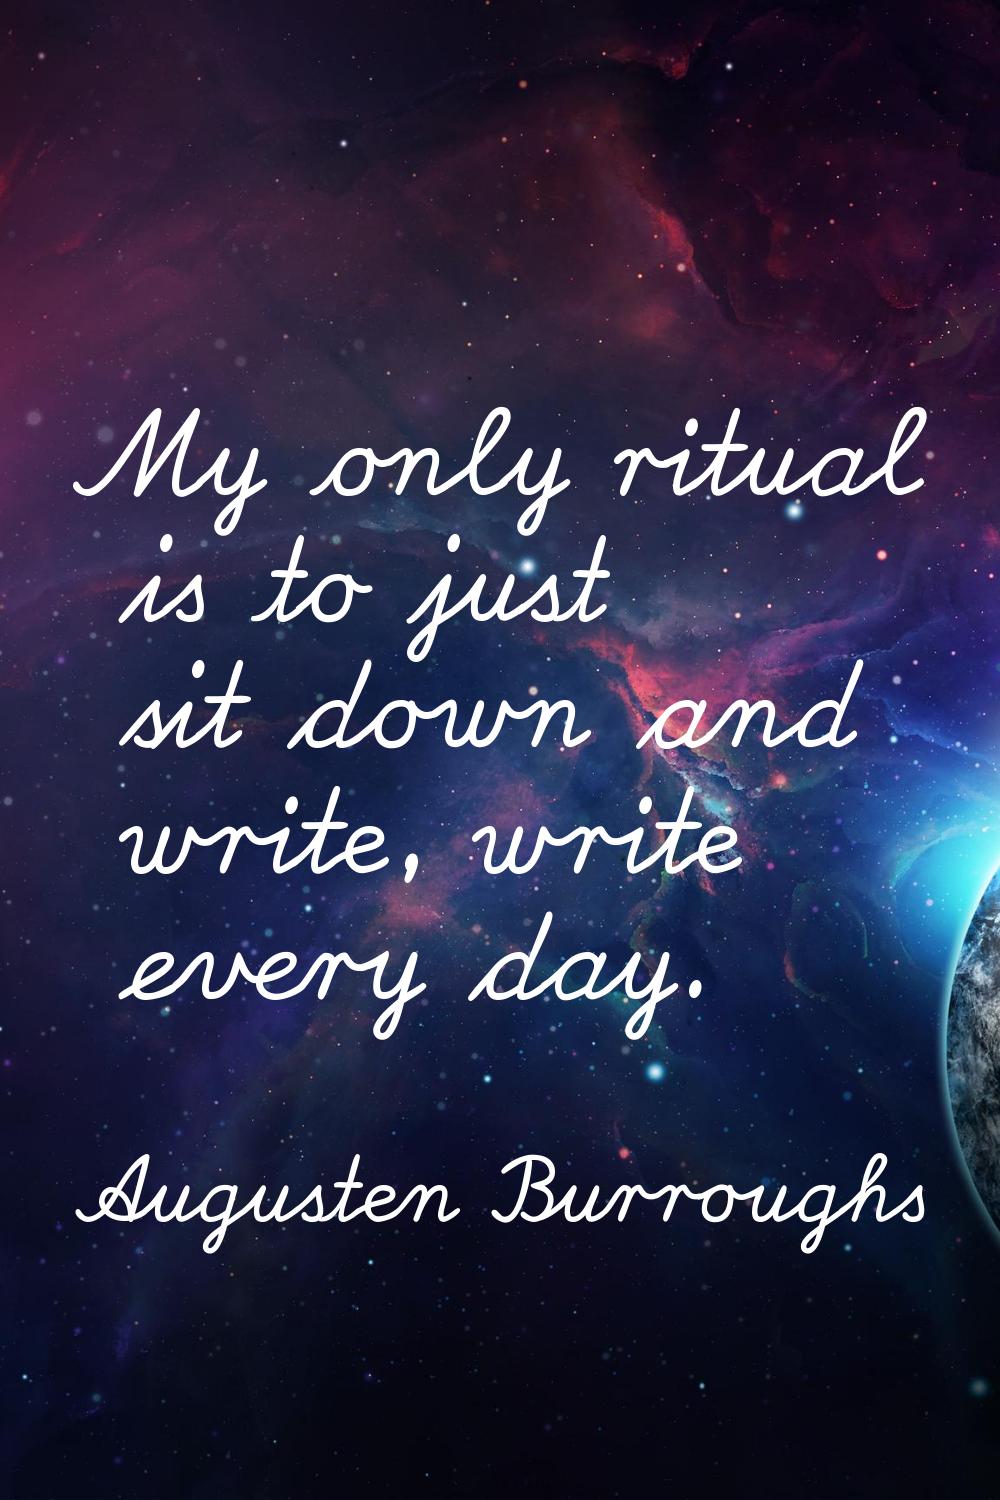 My only ritual is to just sit down and write, write every day.